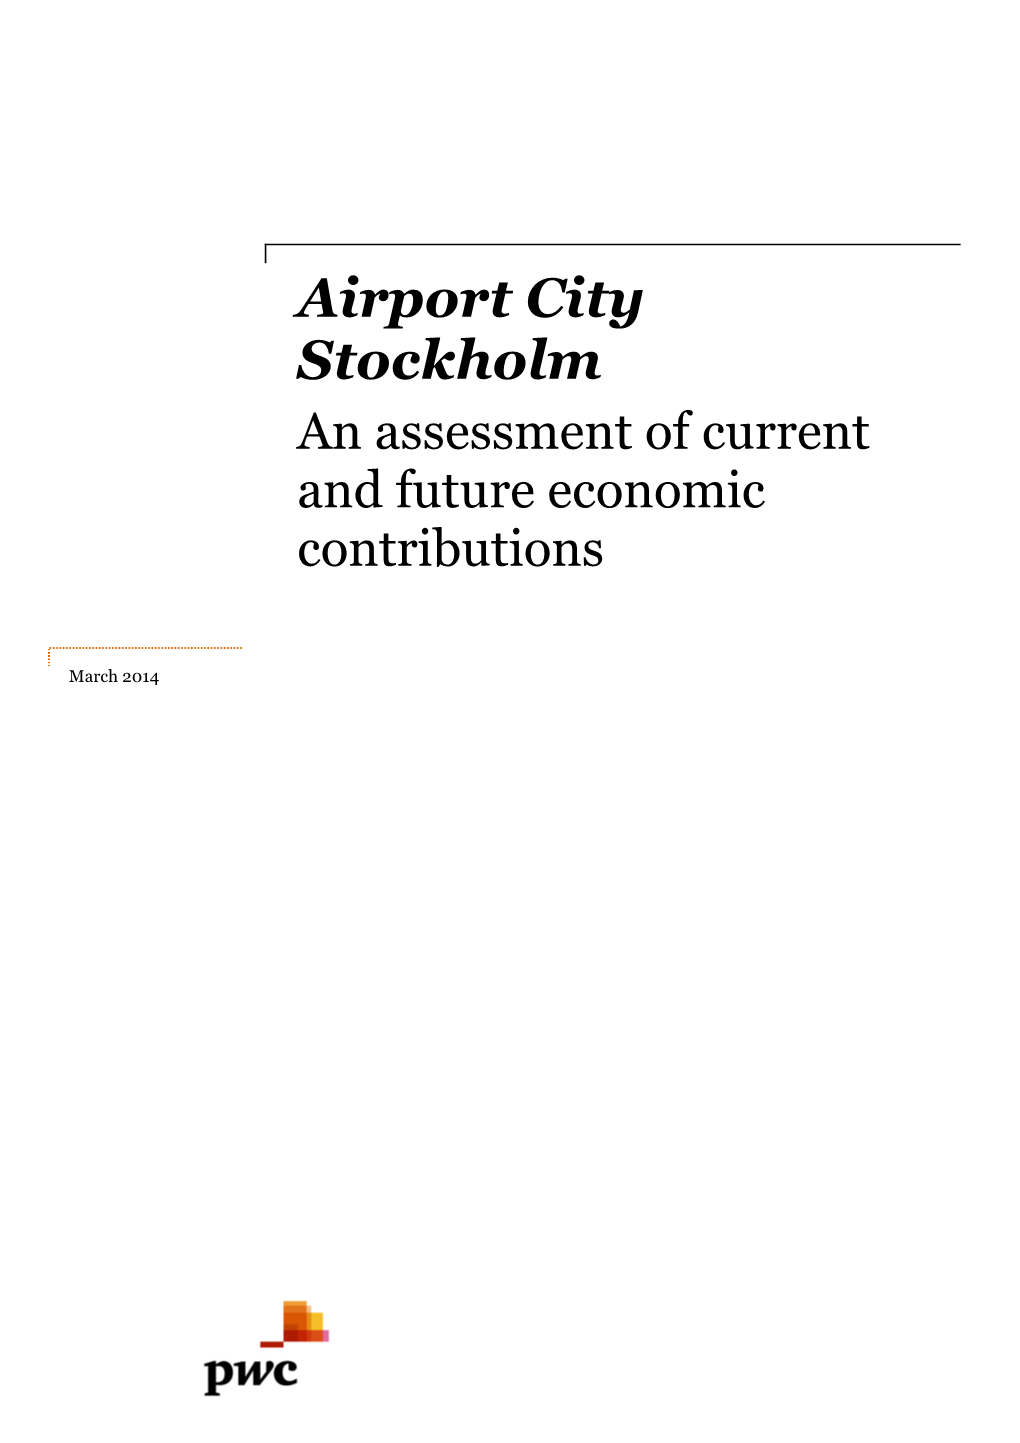 Airport City Stockholm an Assessment of Current and Future Economic Contributions